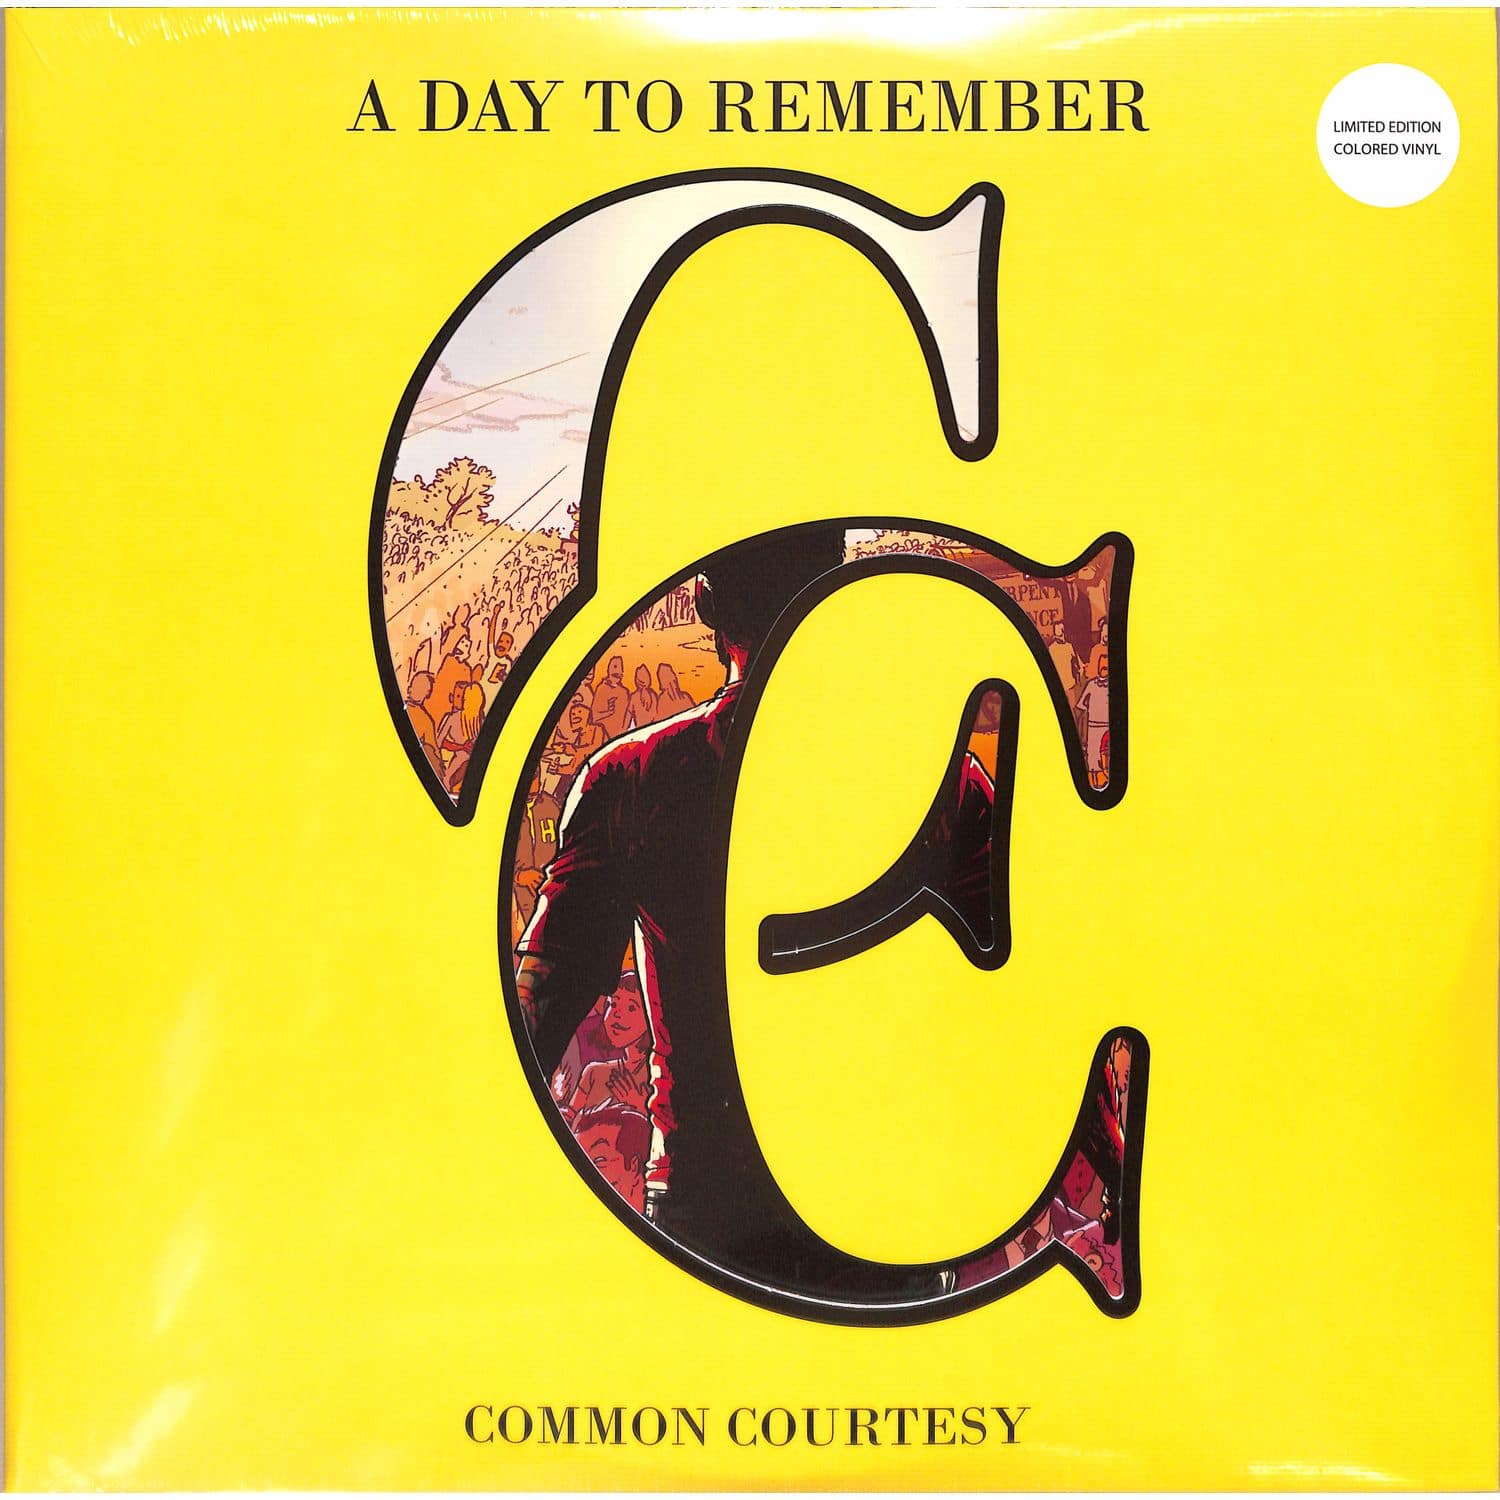 A Day To Remember - COMMON COURTESY 